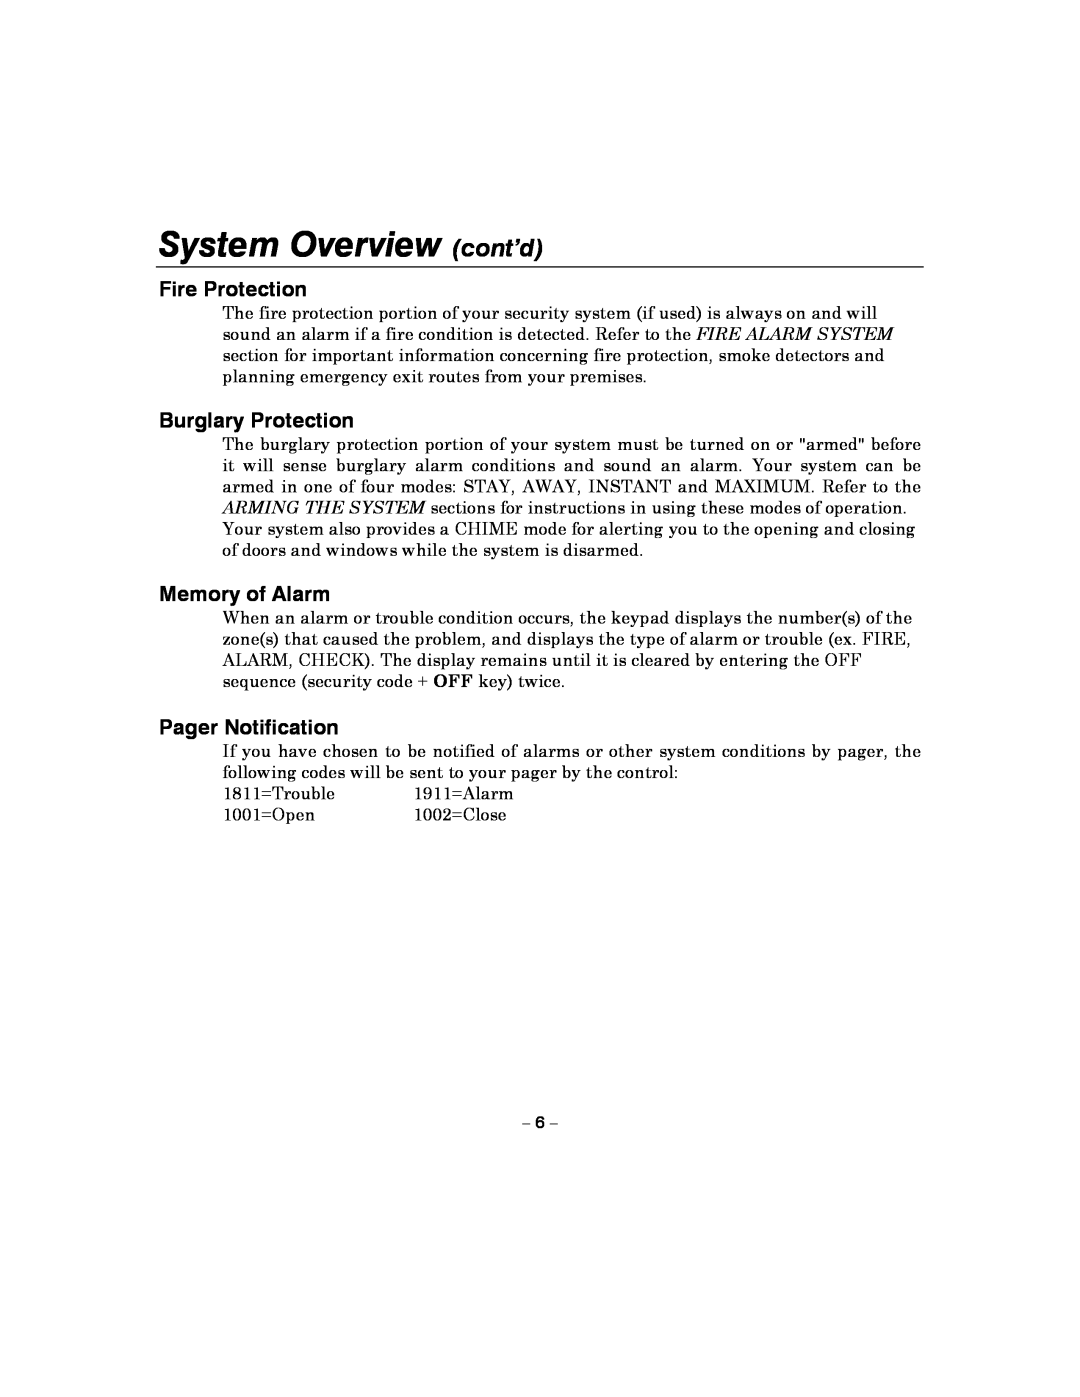 Honeywell 4110XM manual System Overview cont’d, Fire Protection, Burglary Protection, Memory of Alarm, Pager Notification 